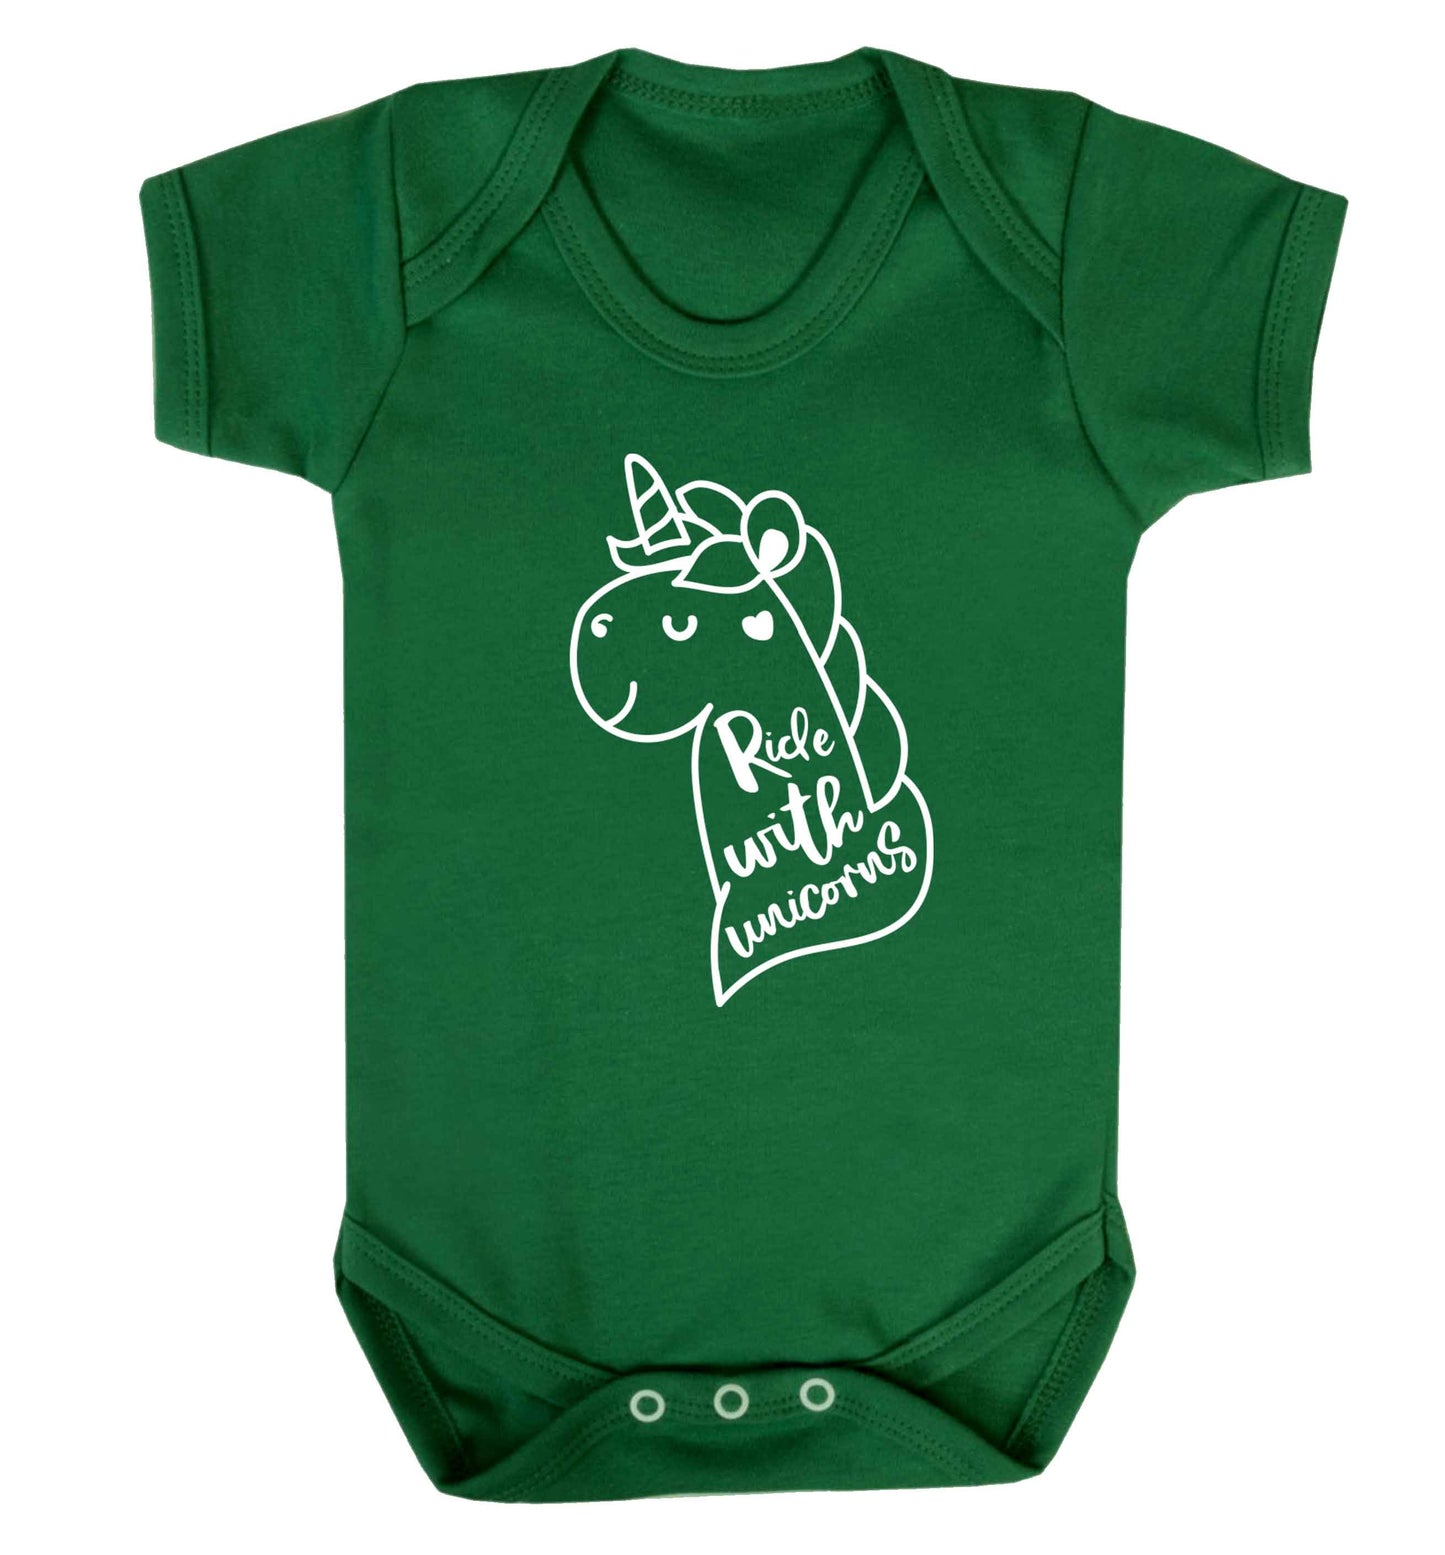 Ride with unicorns Baby Vest green 18-24 months